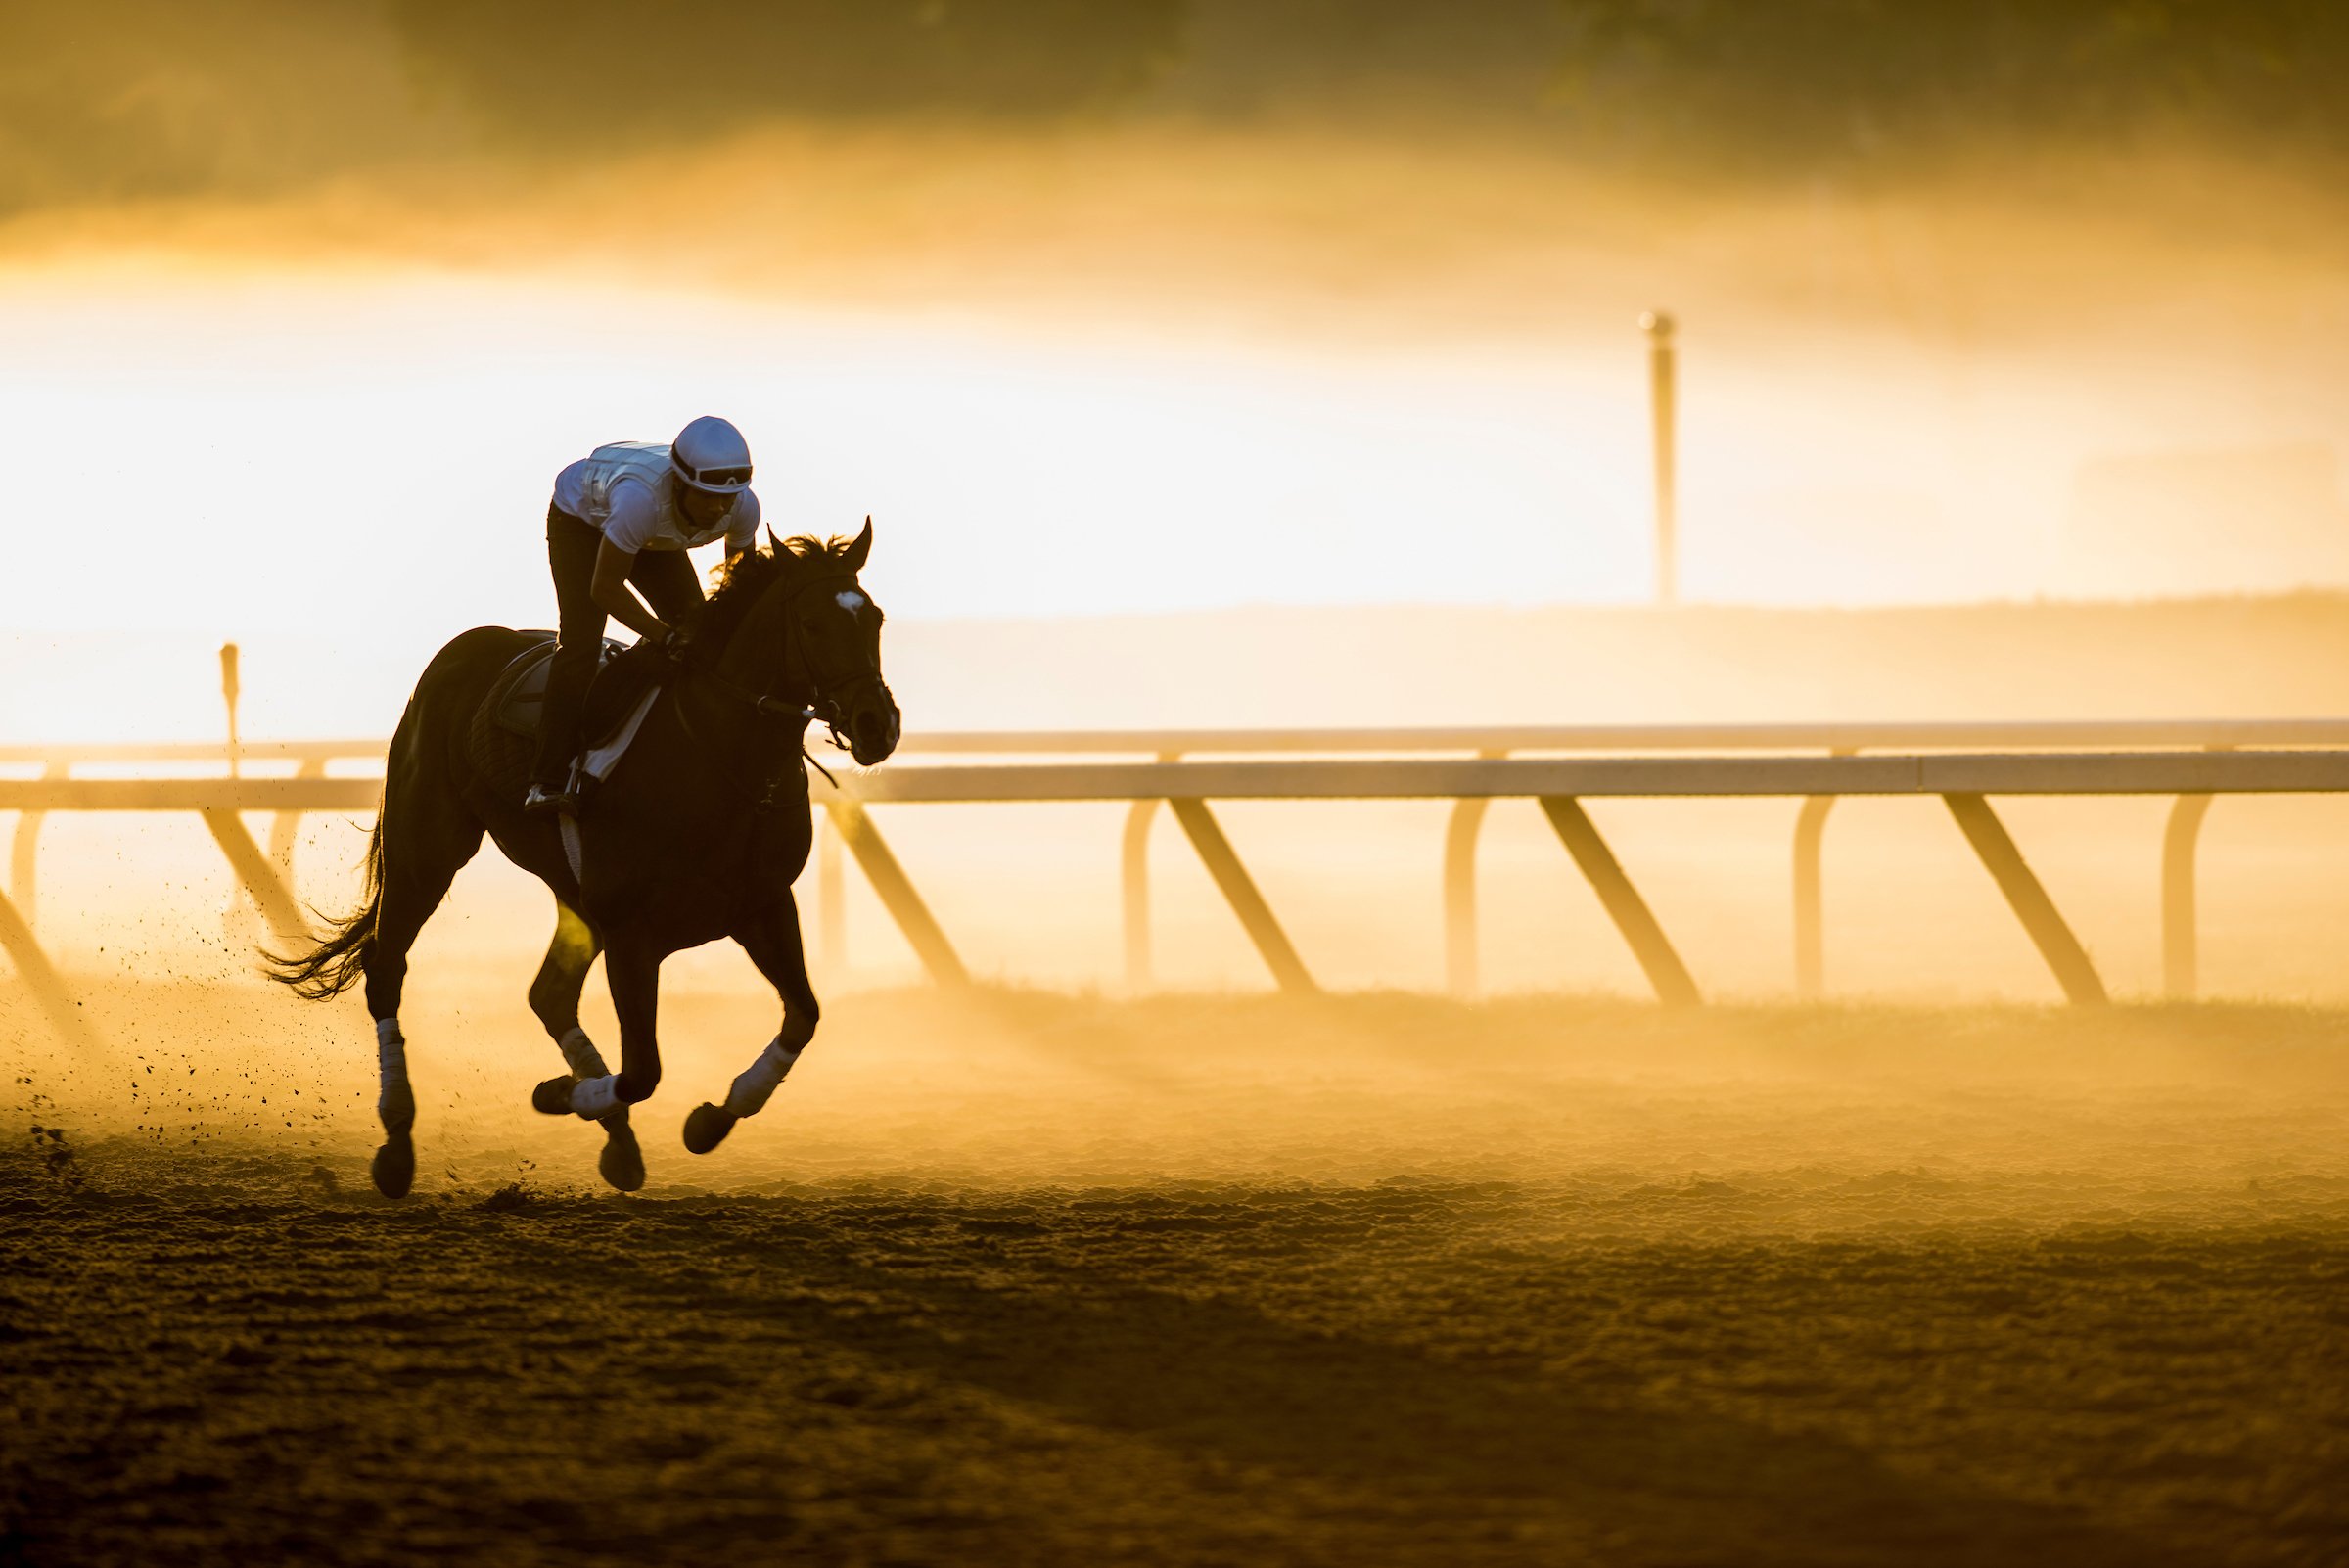 Early Morning workout at Saratoga Race Course, Capital-Saratoga Region , Capital-Saratoga Region